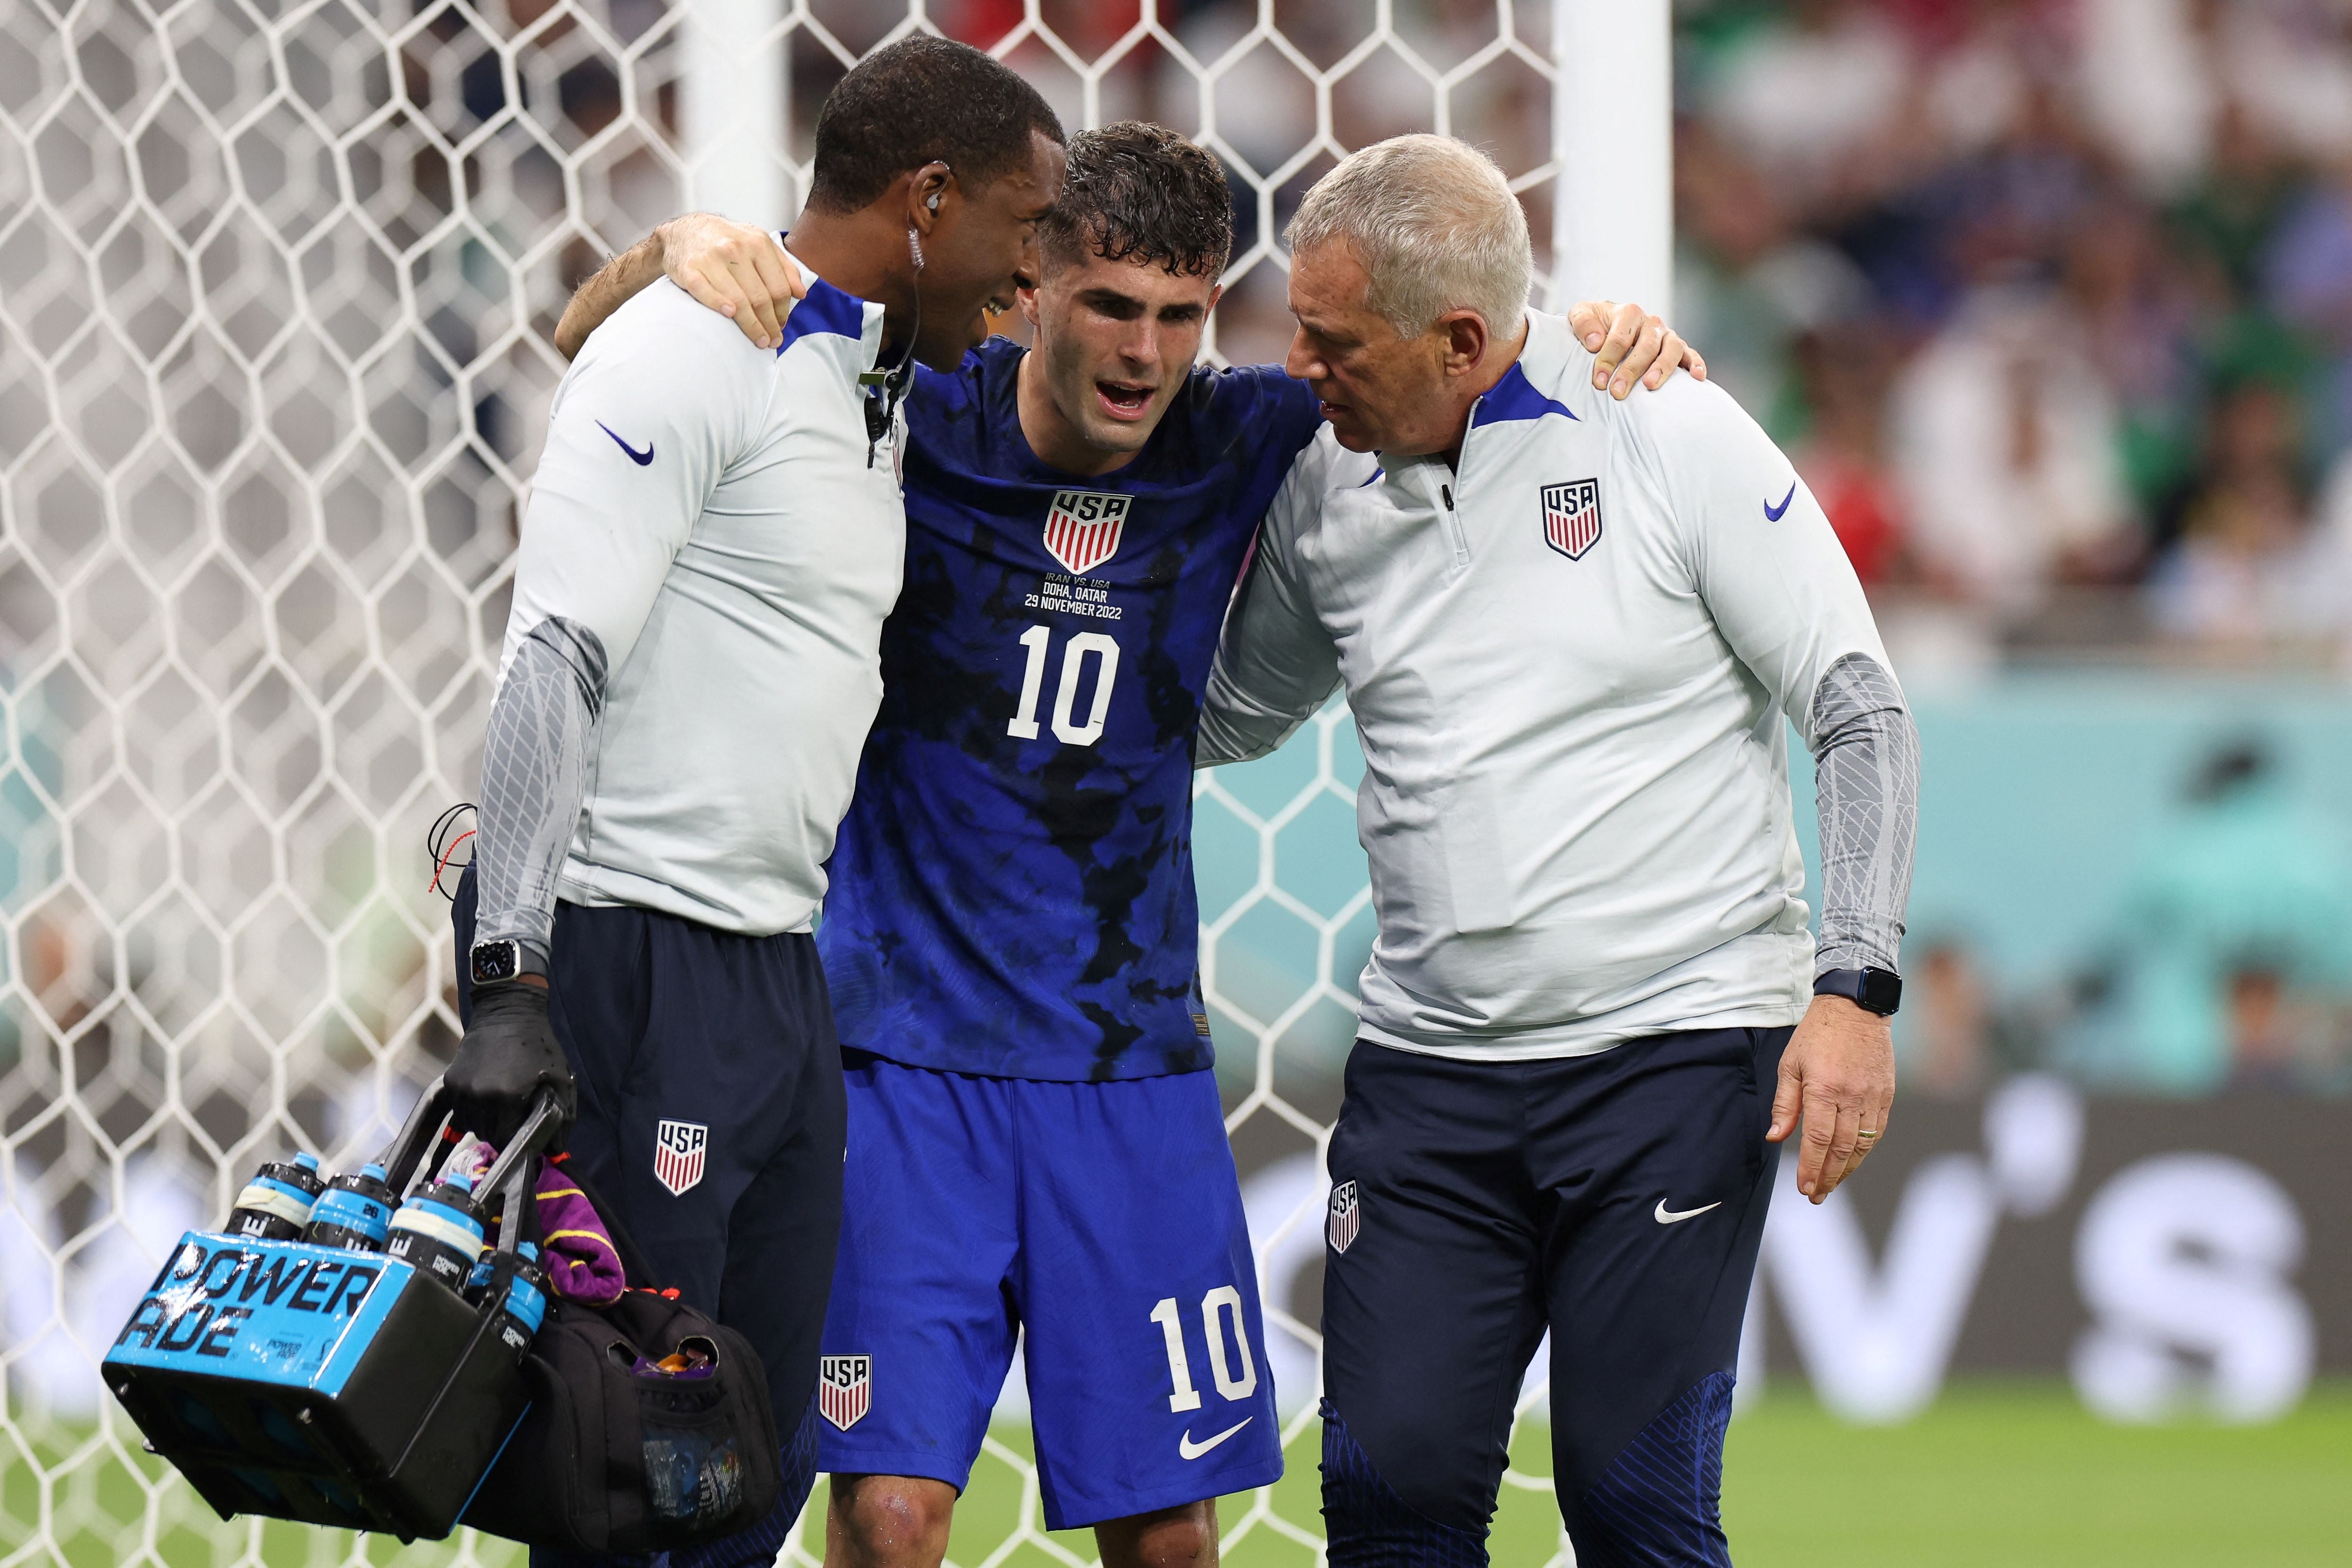 Christian Pulisic injured his abdominal in the process of scoring USA’s goal against Iran